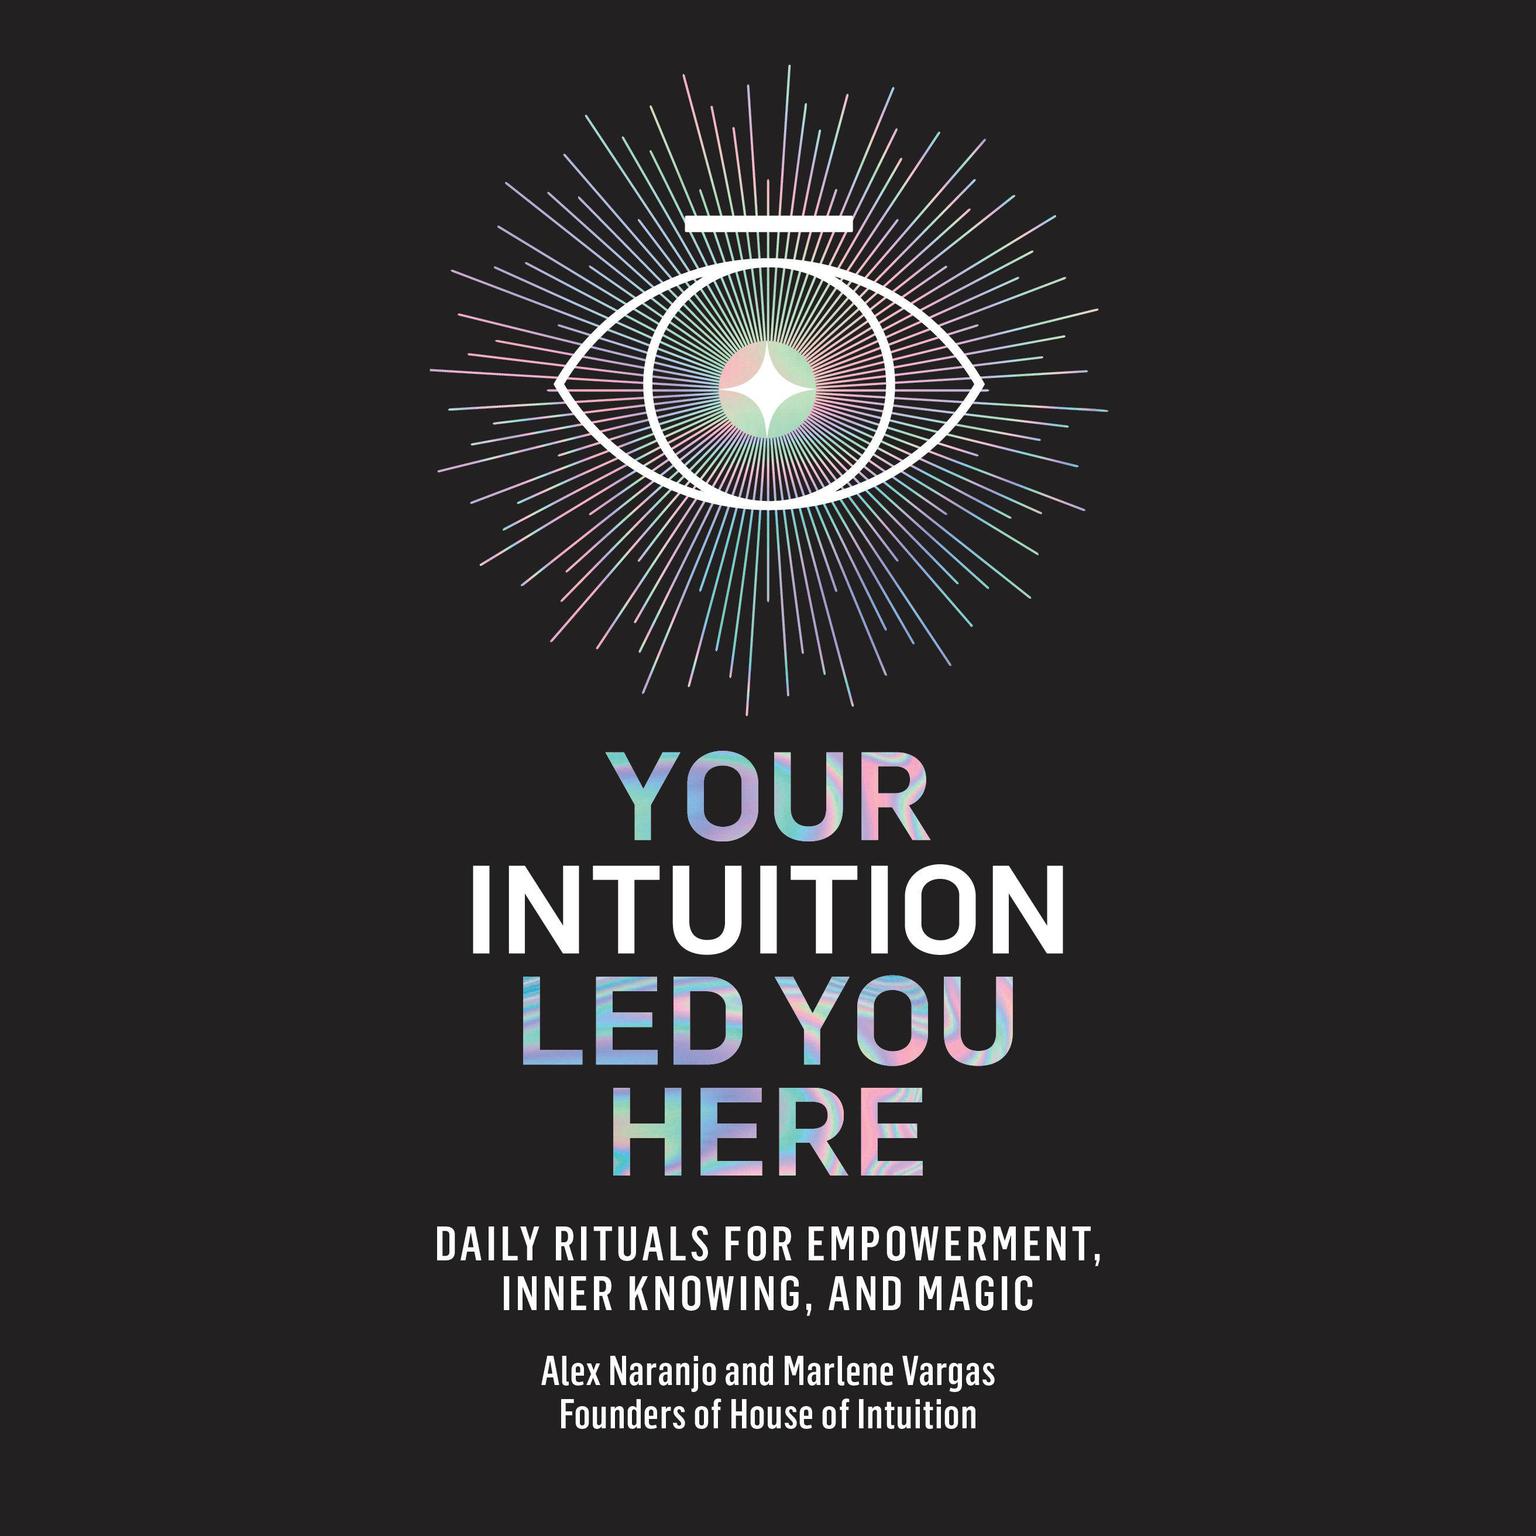 Your Intuition Led You Here: Daily Rituals for Empowerment, Inner Knowing, and Magic Audiobook, by Alex Naranjo